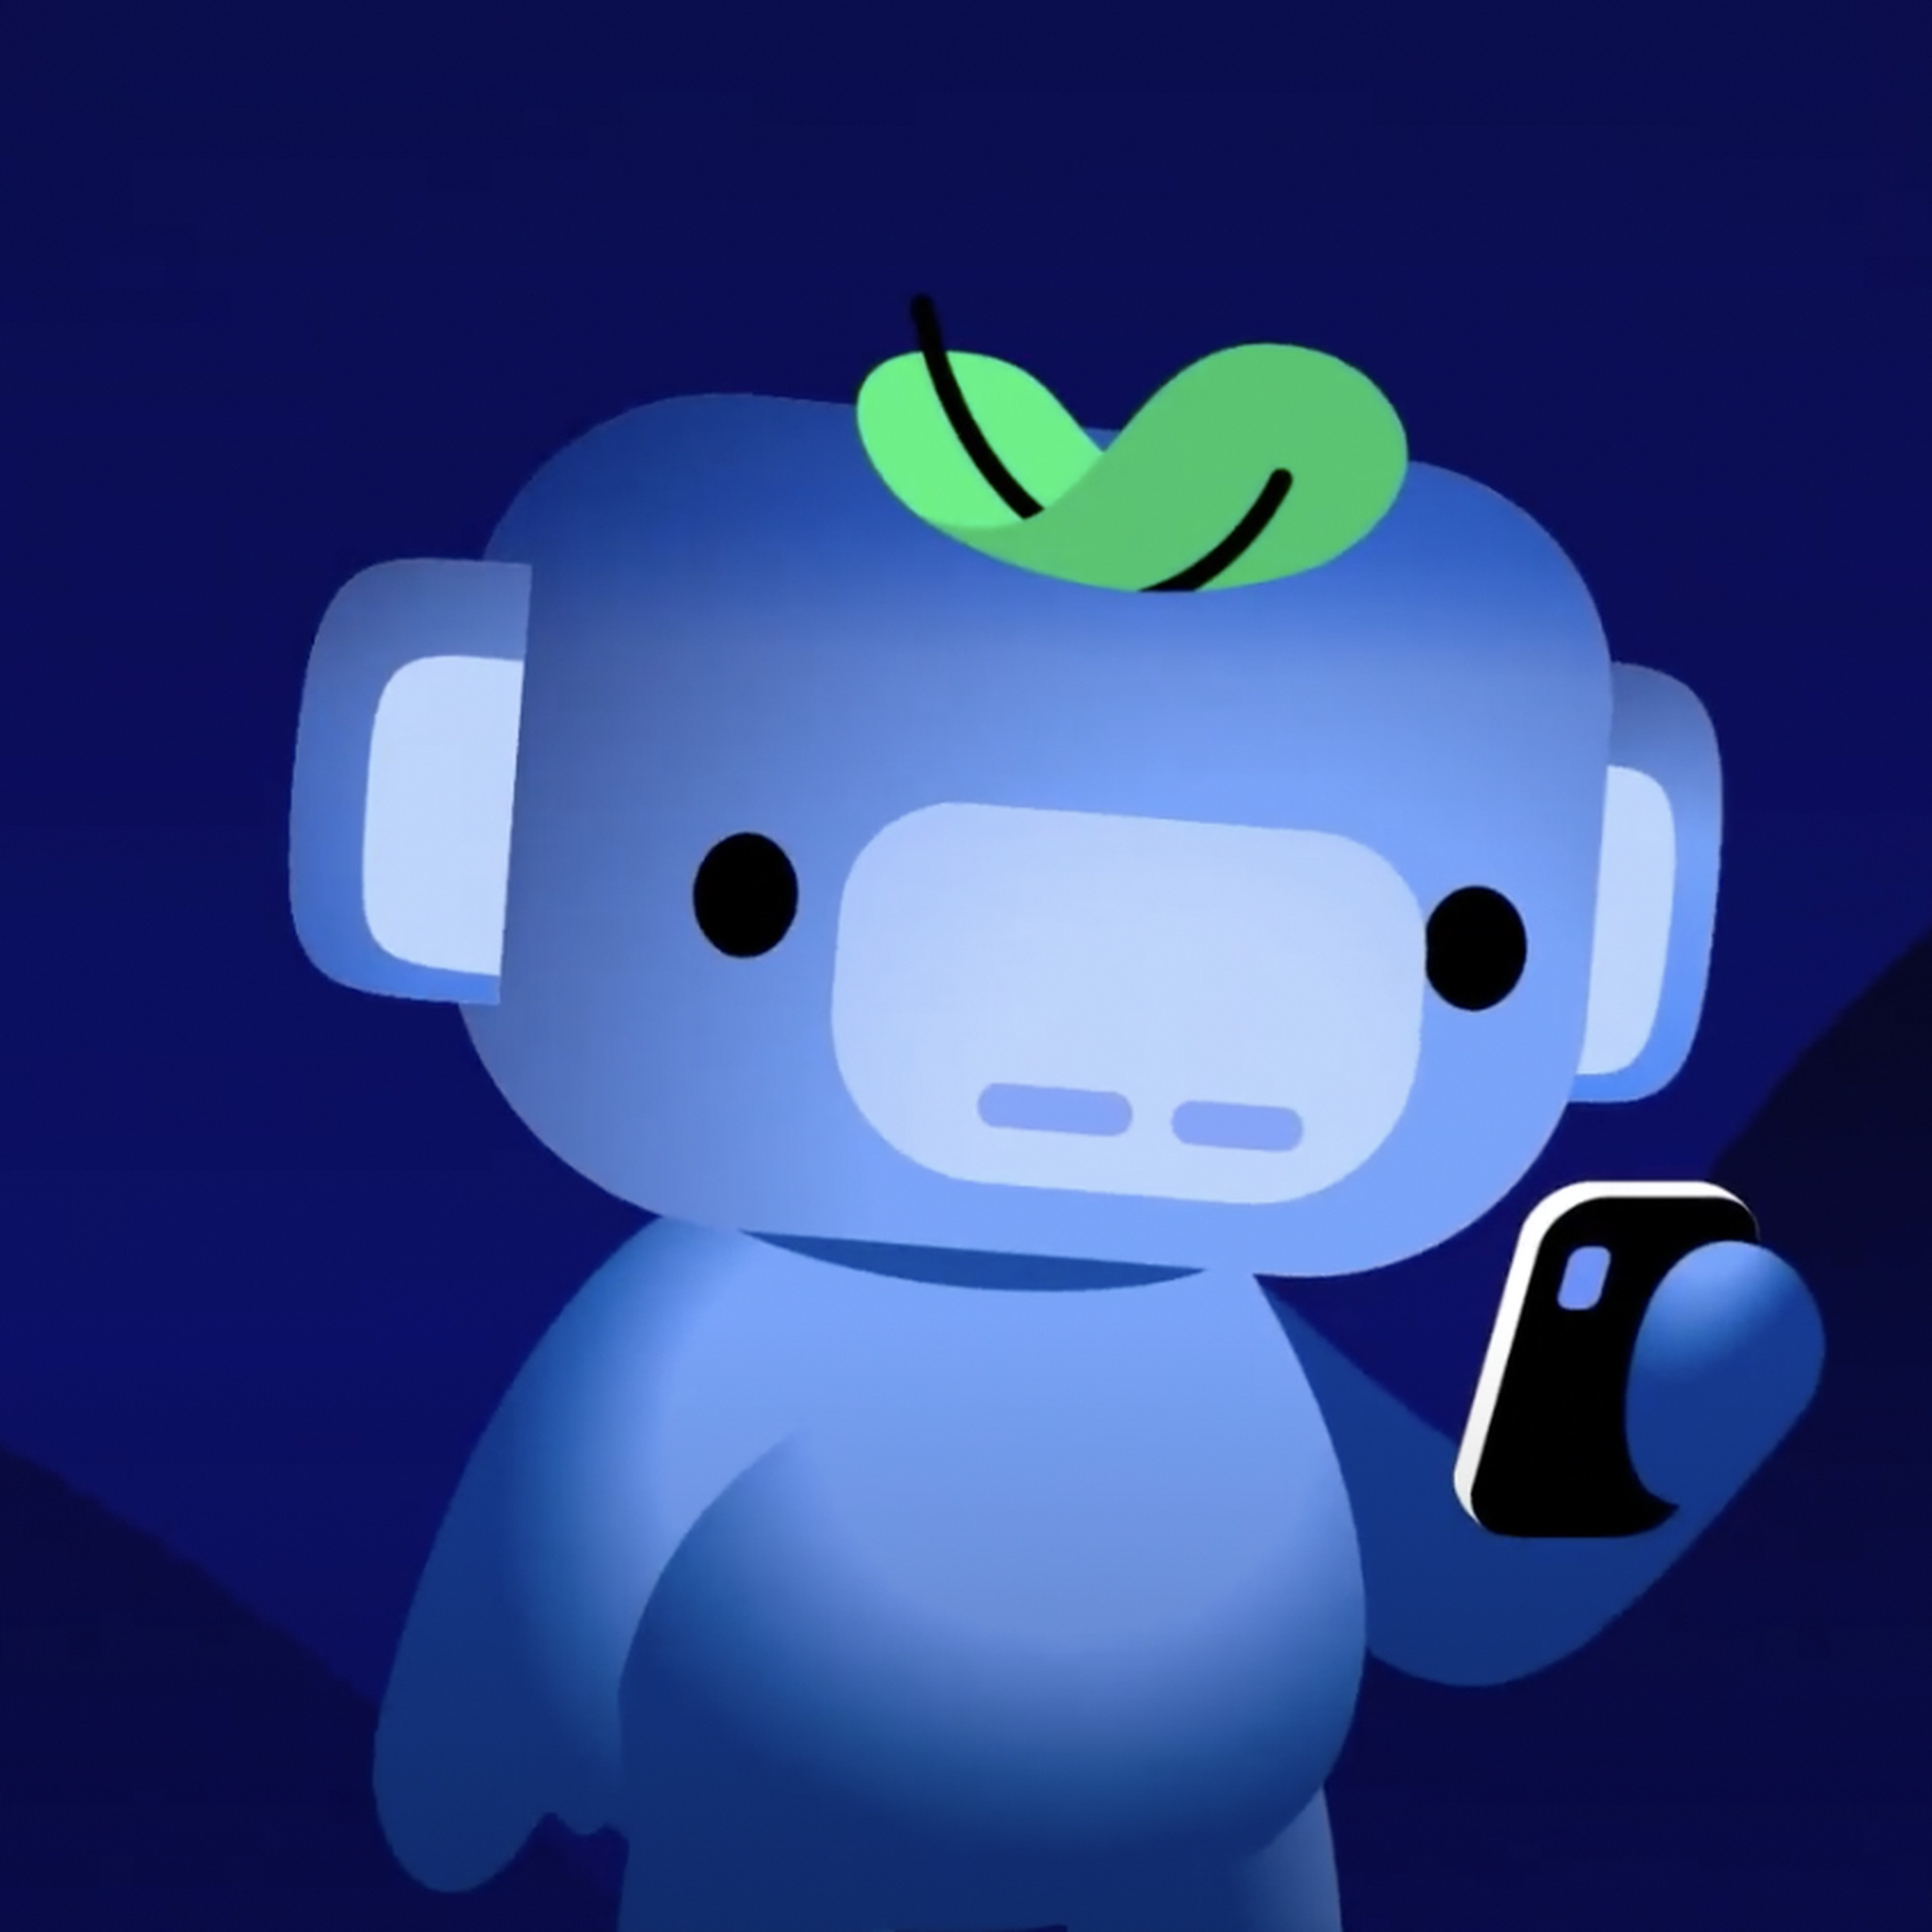 Image of Discord mascot Wumpus happily engaged with his phone.